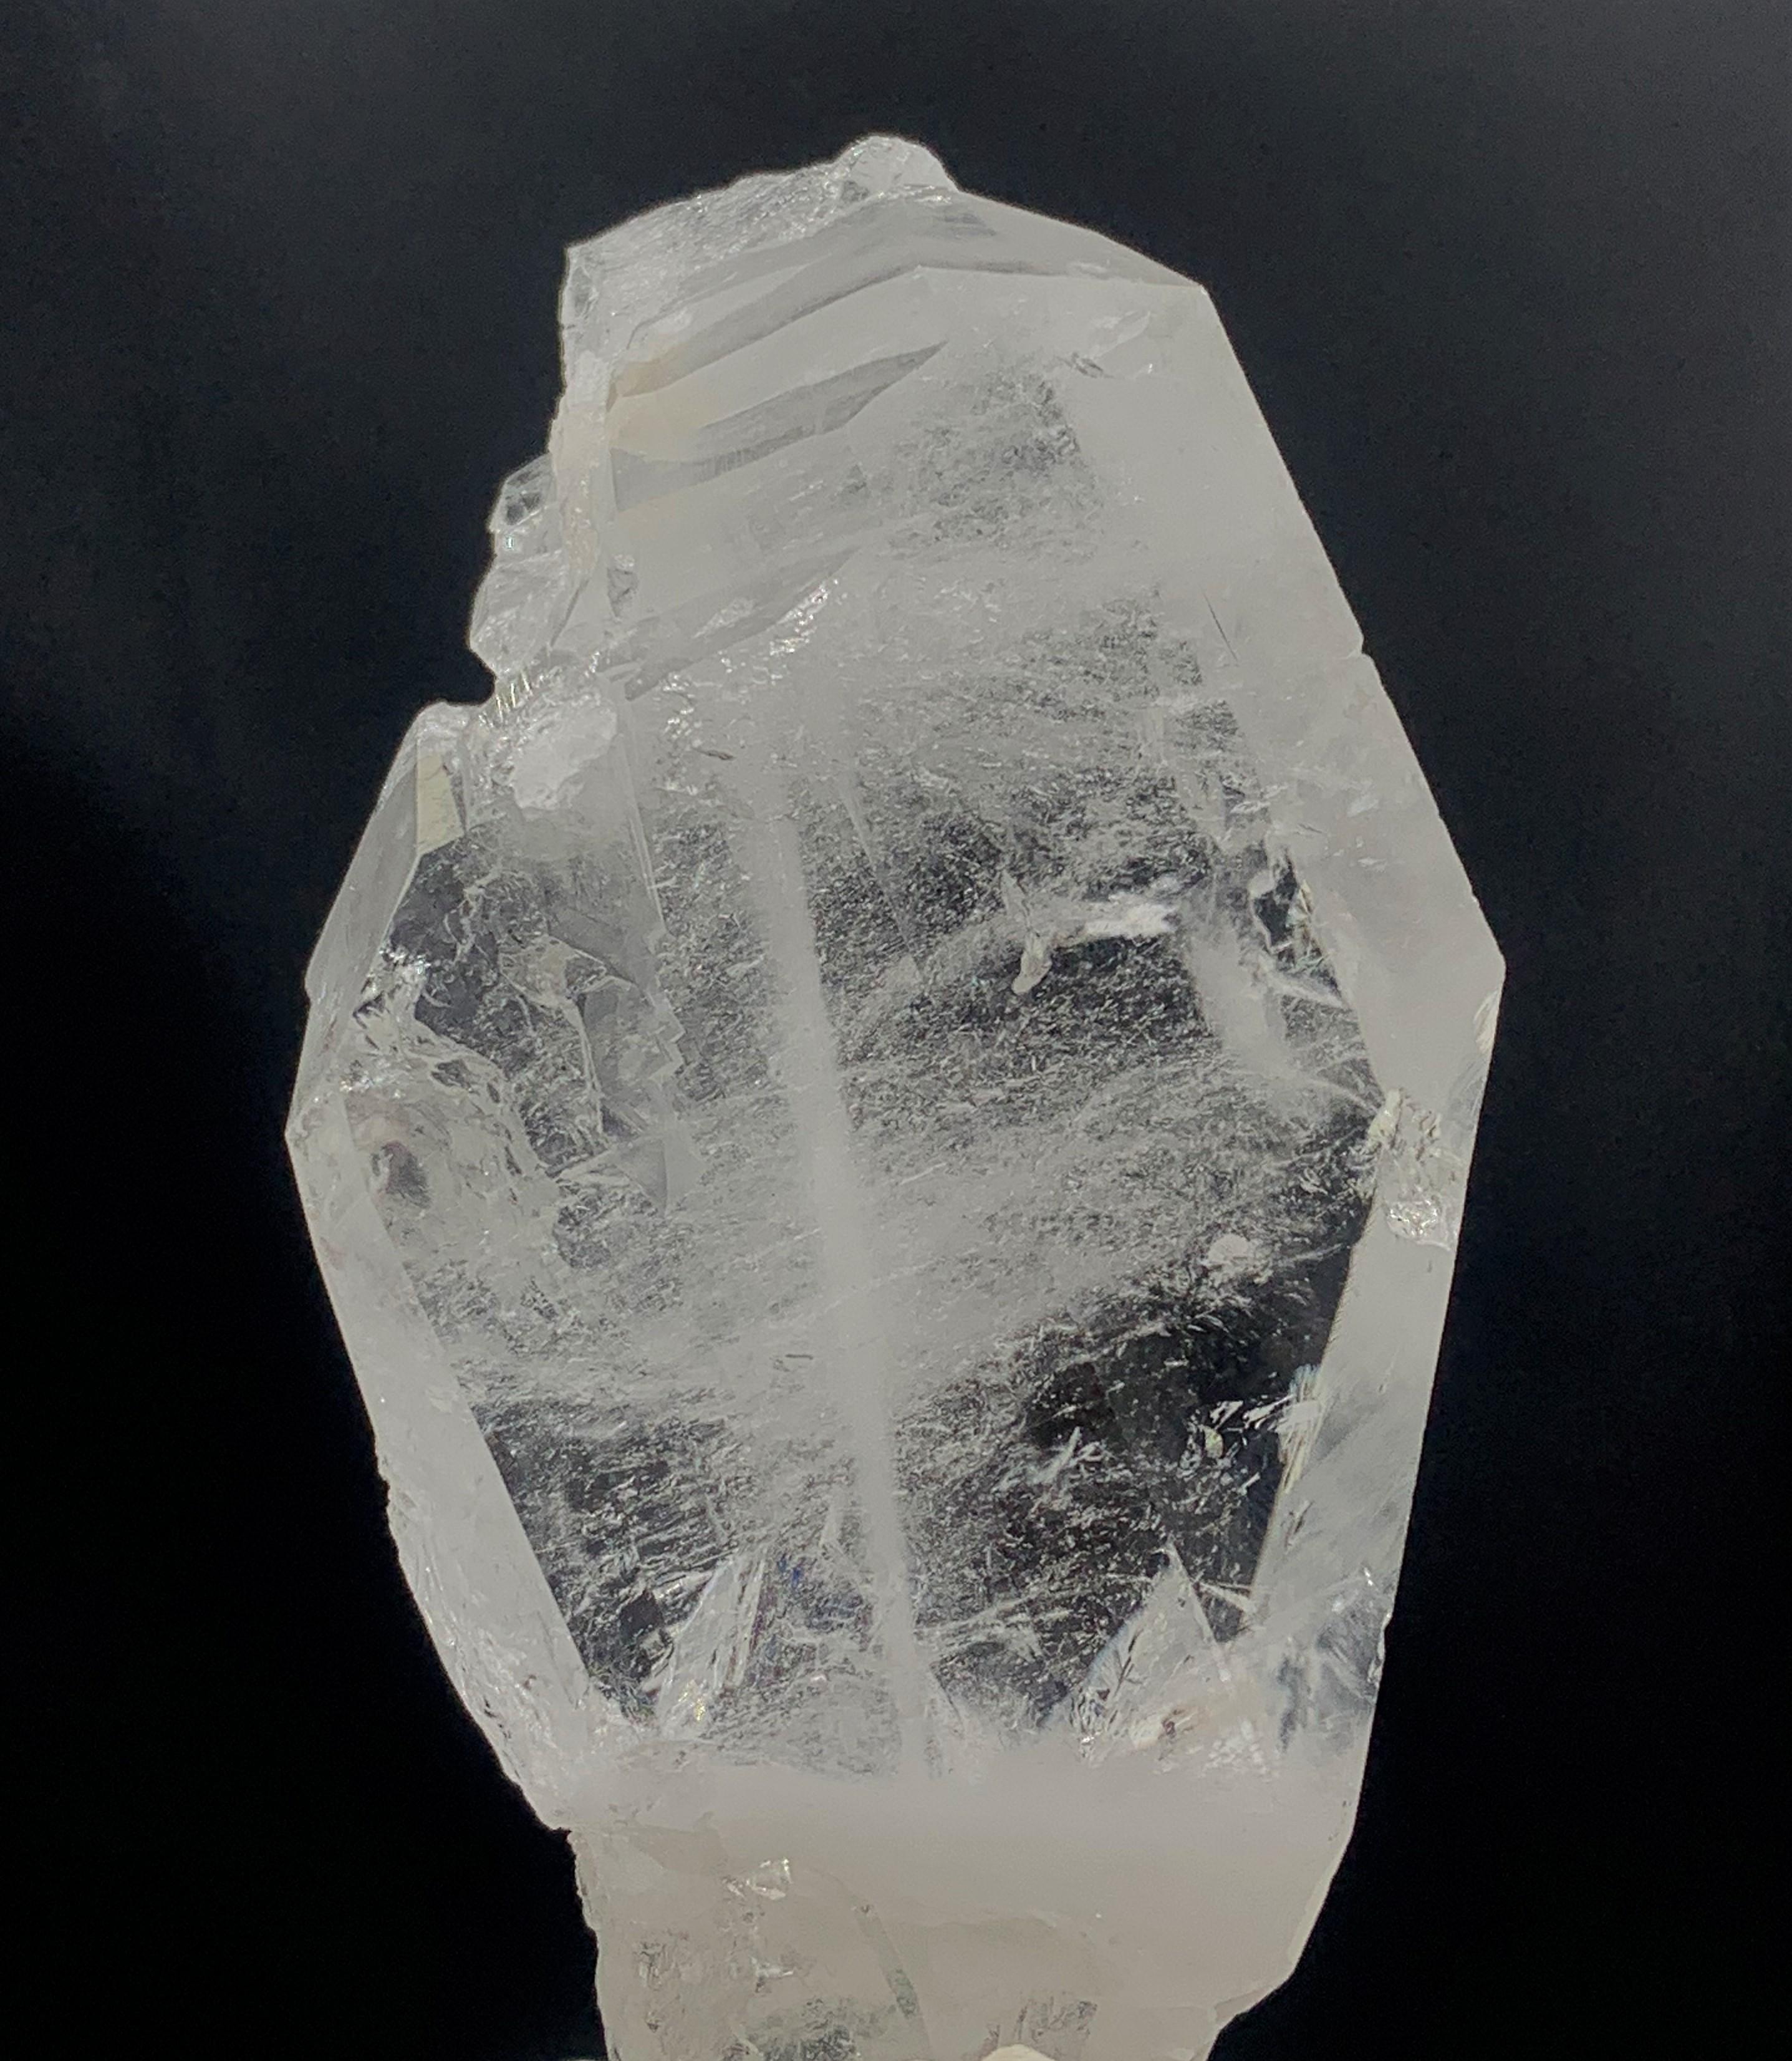 Unique Faden Quartz crystal inner milkway line from Balochistan Pakistan Mine
WEIGHT 100.21 grams
DIMENSIONS 8.0x4.6x2.3 CM
ORIGIN Balochistan, Pakistan
TREATMENT None
What is special about quartz?
The answer is quite simple durability and